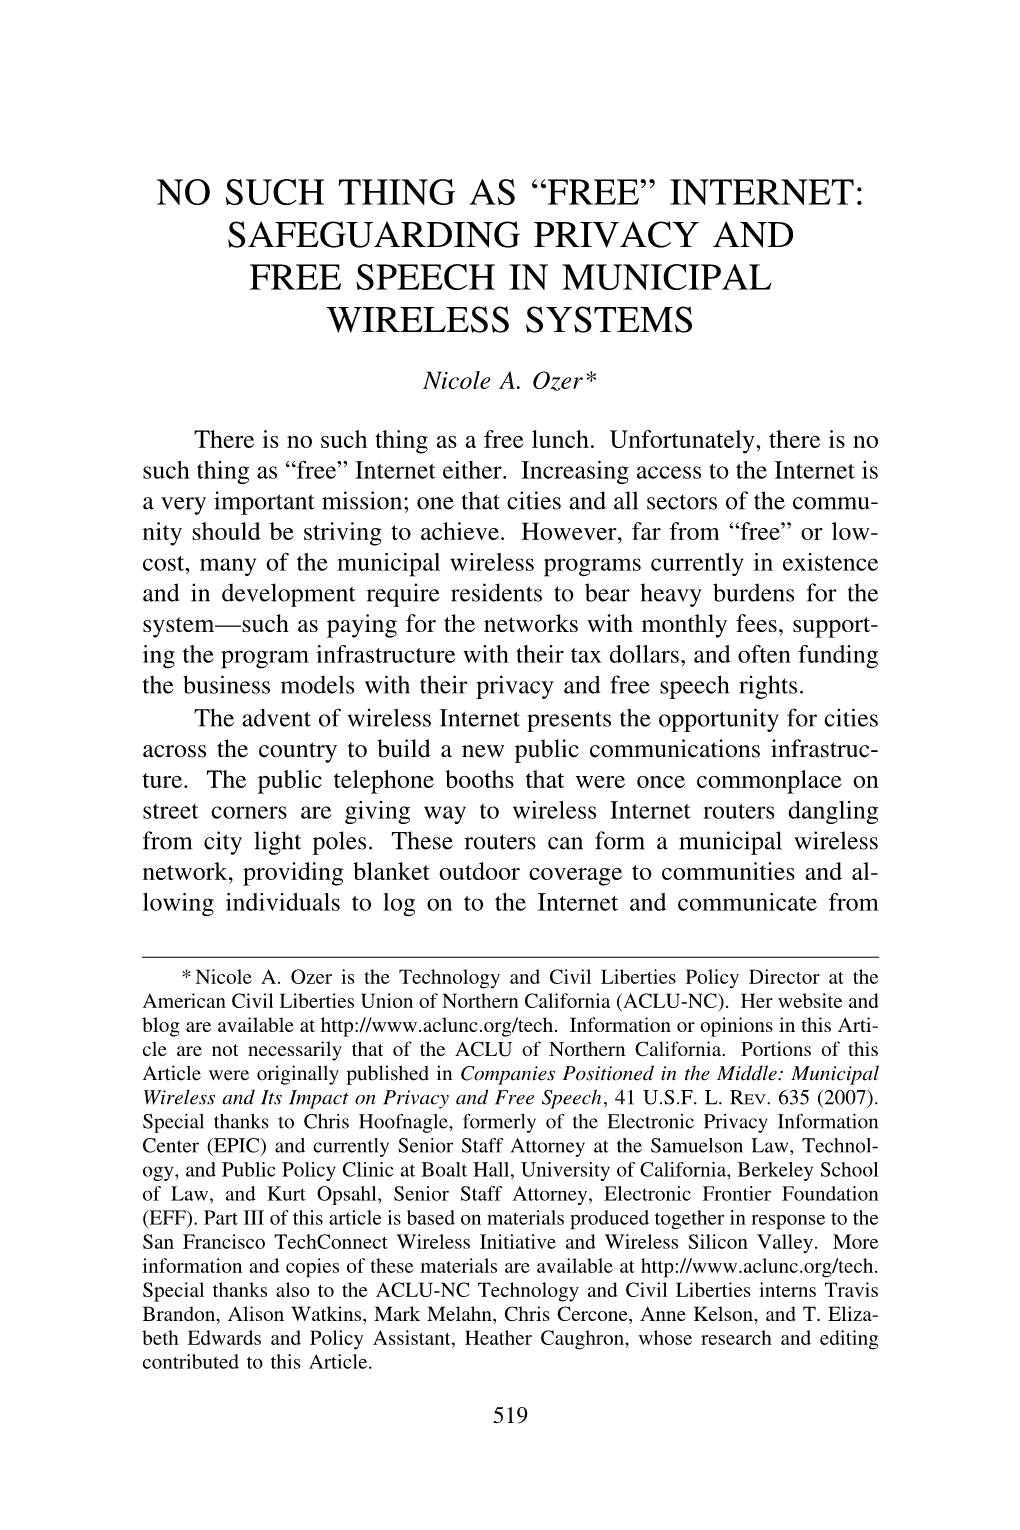 “Free” Internet: Safeguarding Privacy and Free Speech in Municipal Wireless Systems